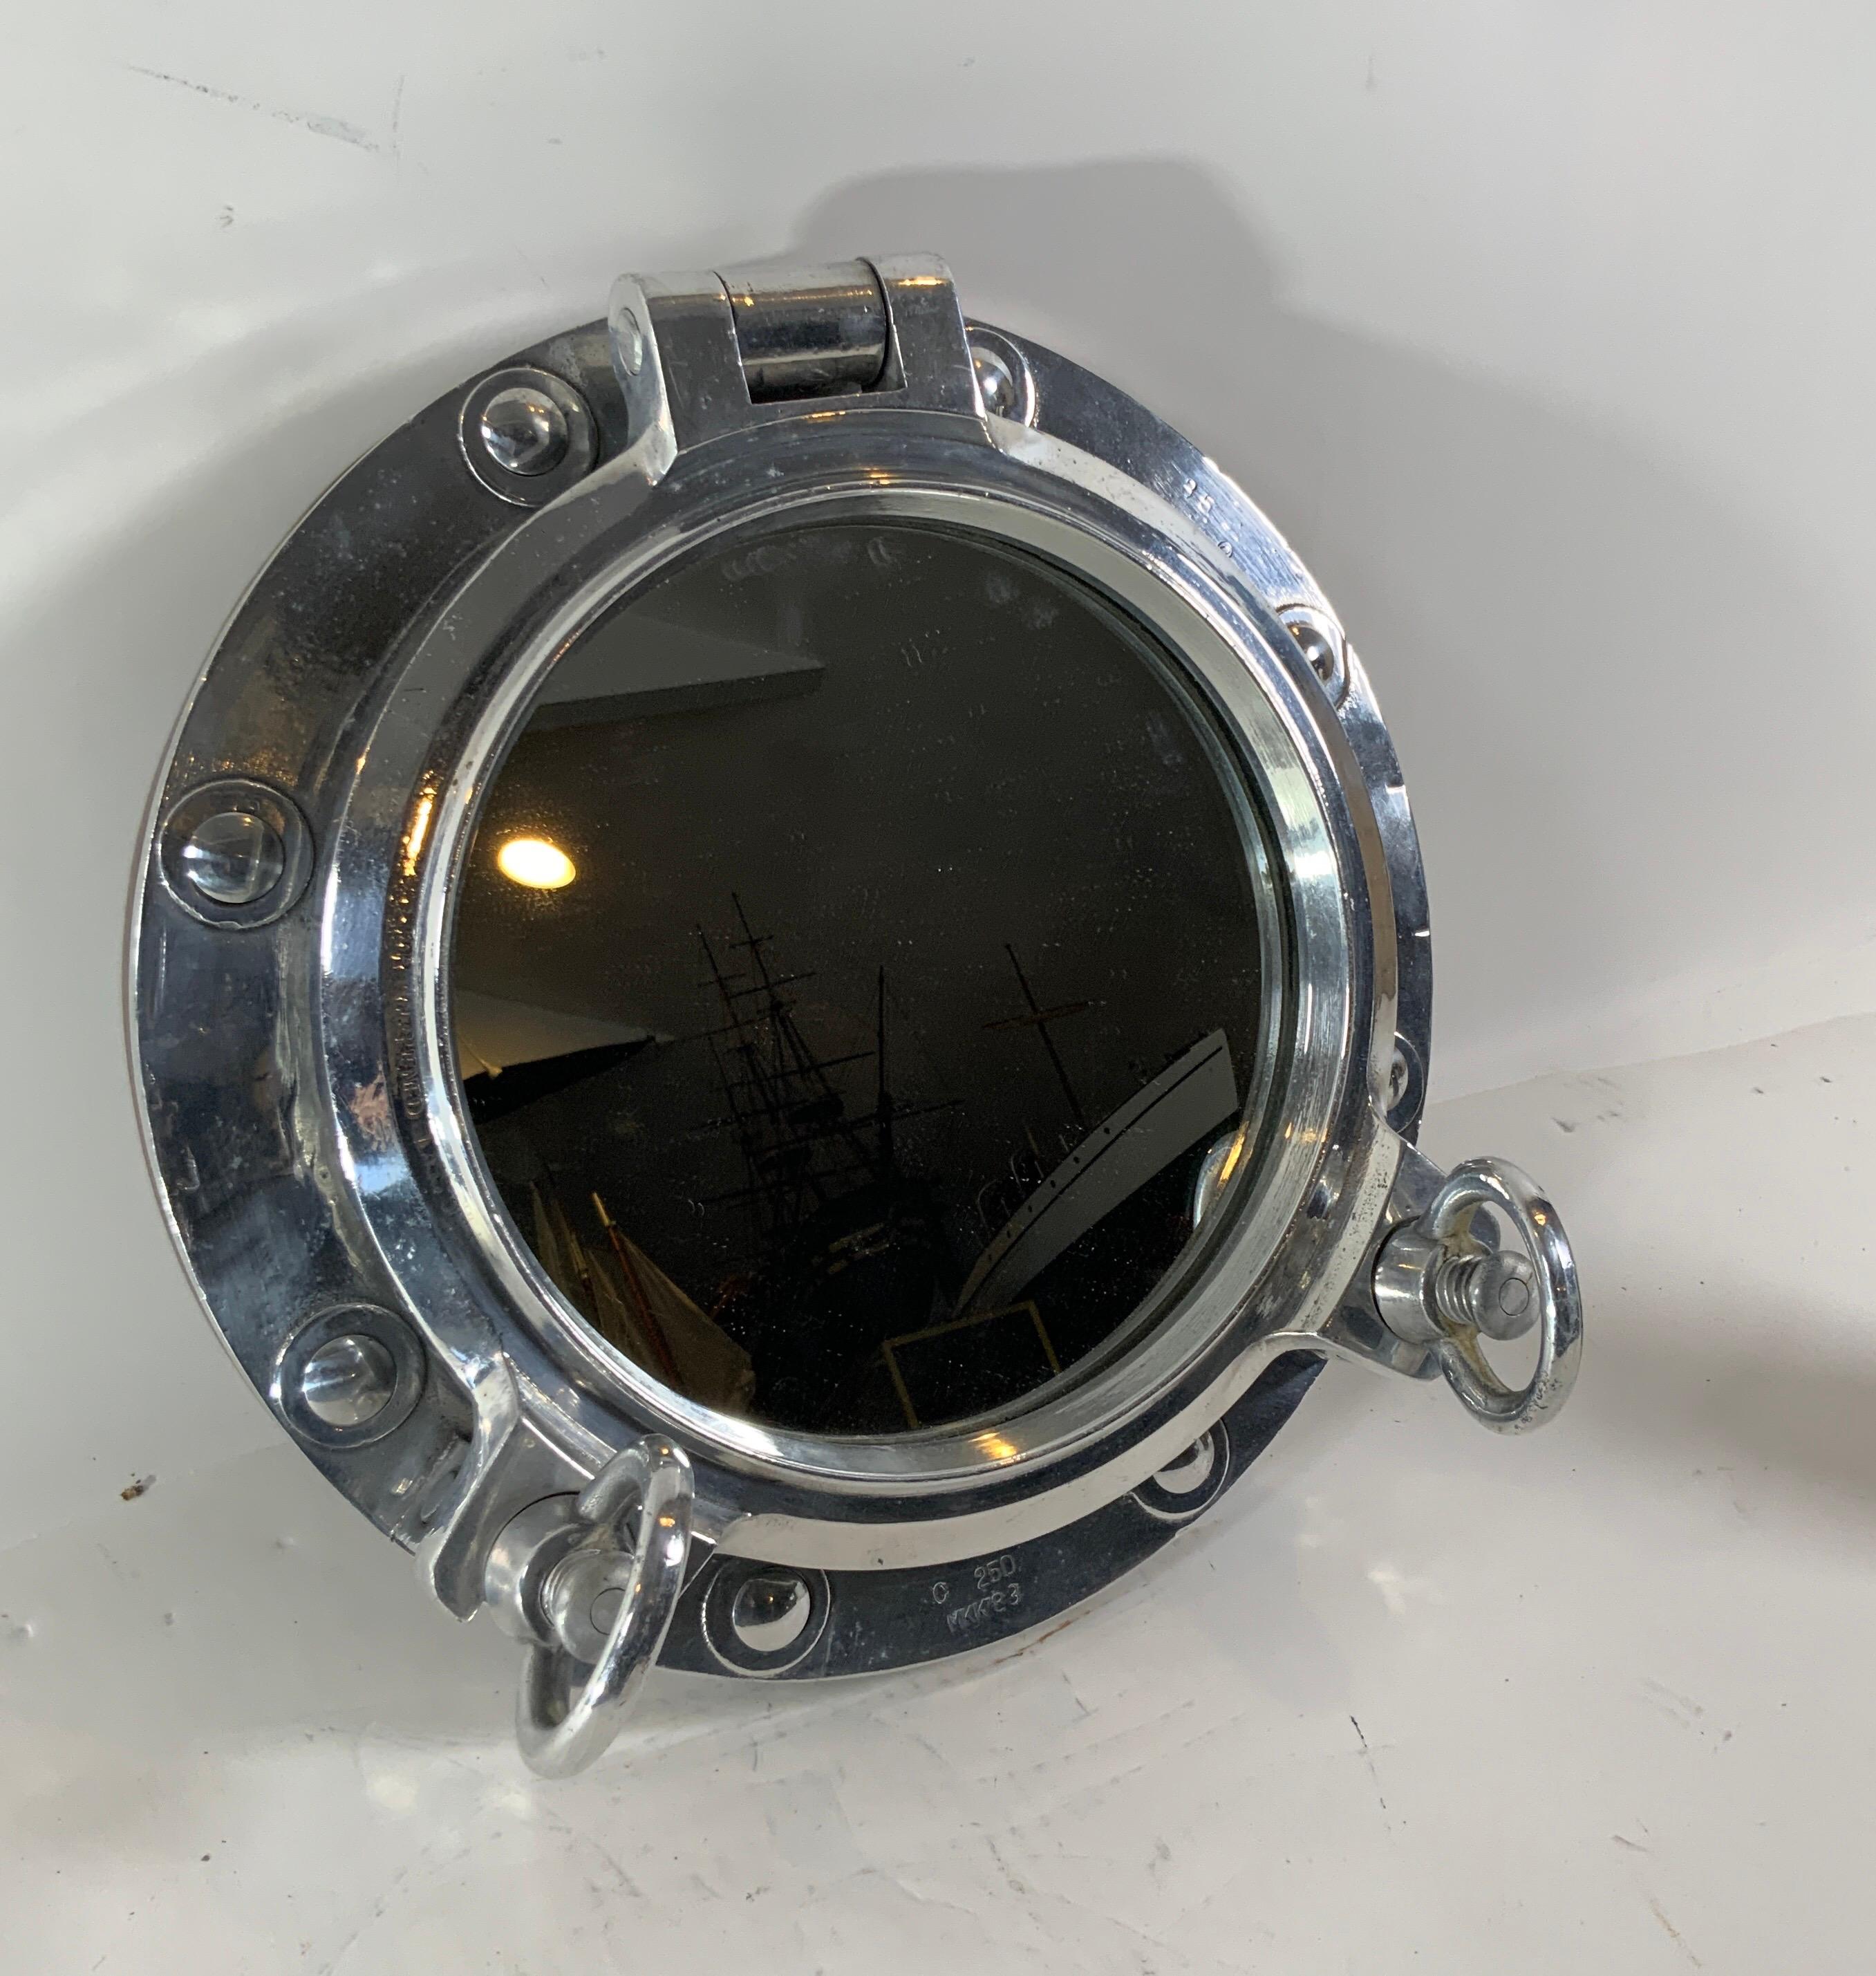 Authentic polished aluminum ship's porthole fitted with a glass mirror. Door is hinged and fitted with two dogbolts. The highly polished porthole is also fitted with a teakwood trim ring on the rear. Bolt holes are covered with caps. Substantial